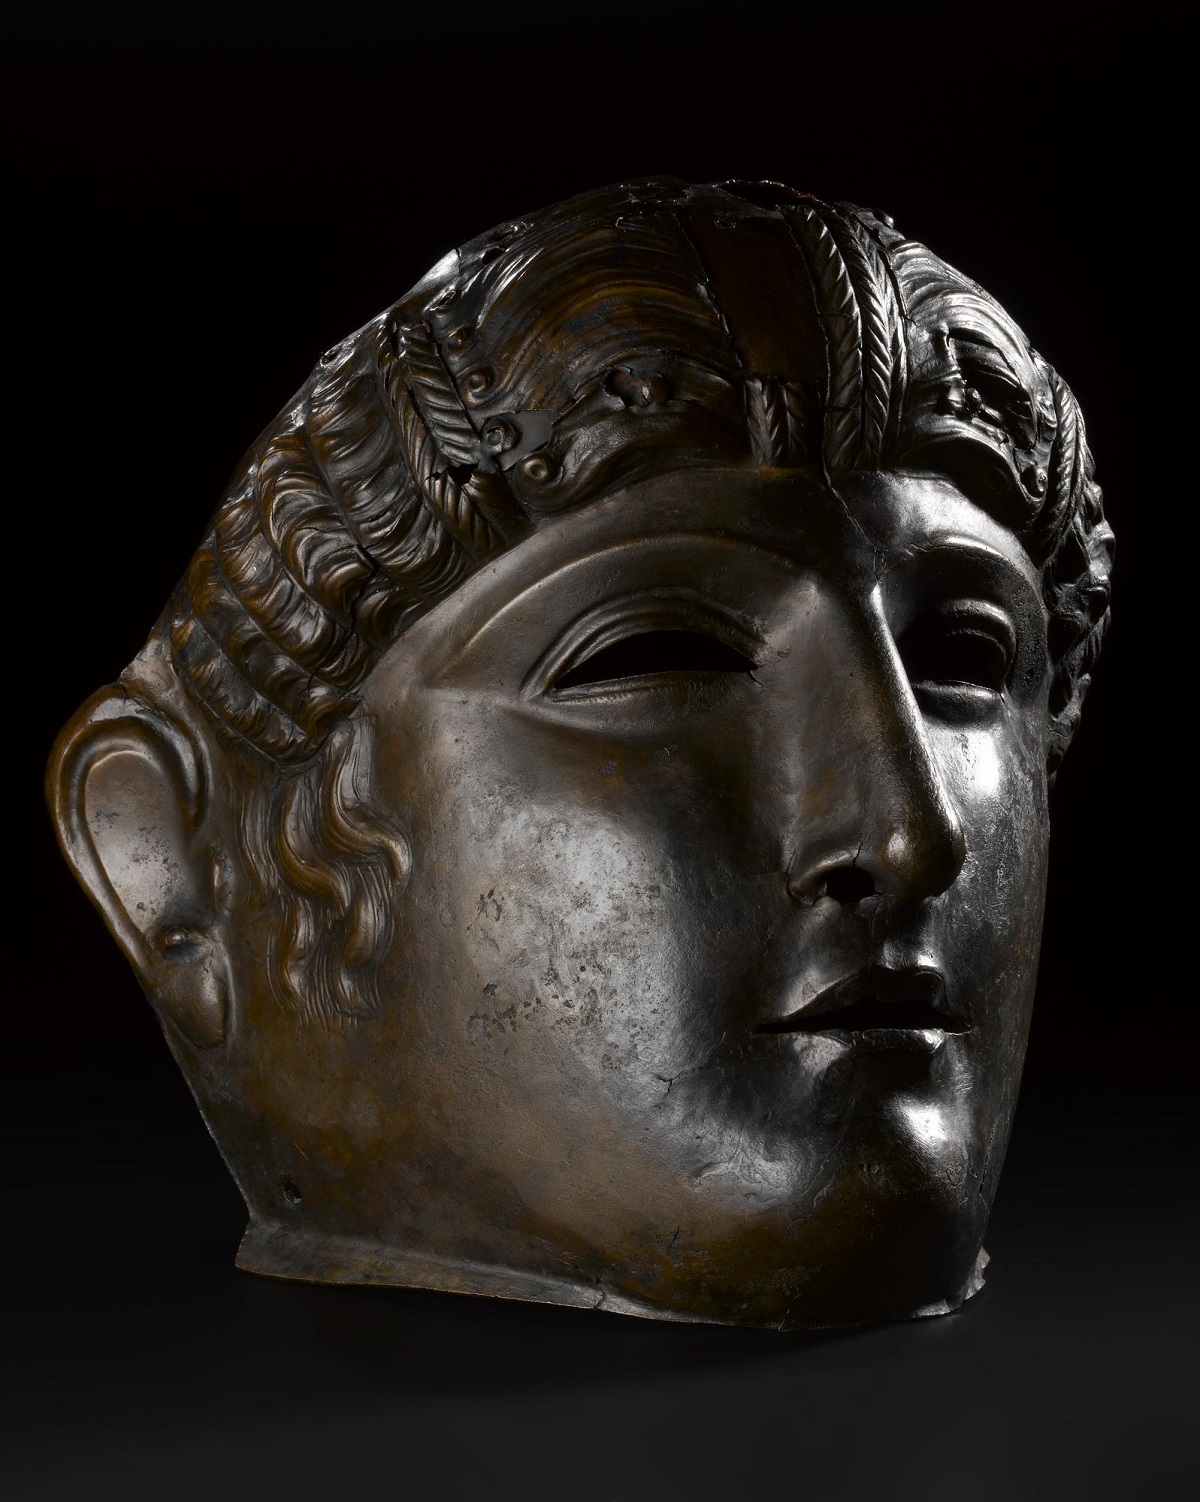 A brownish-black metal Roman parade mask in the visage of a young person with rounded cheeks, strong angular nose, and curling hair.